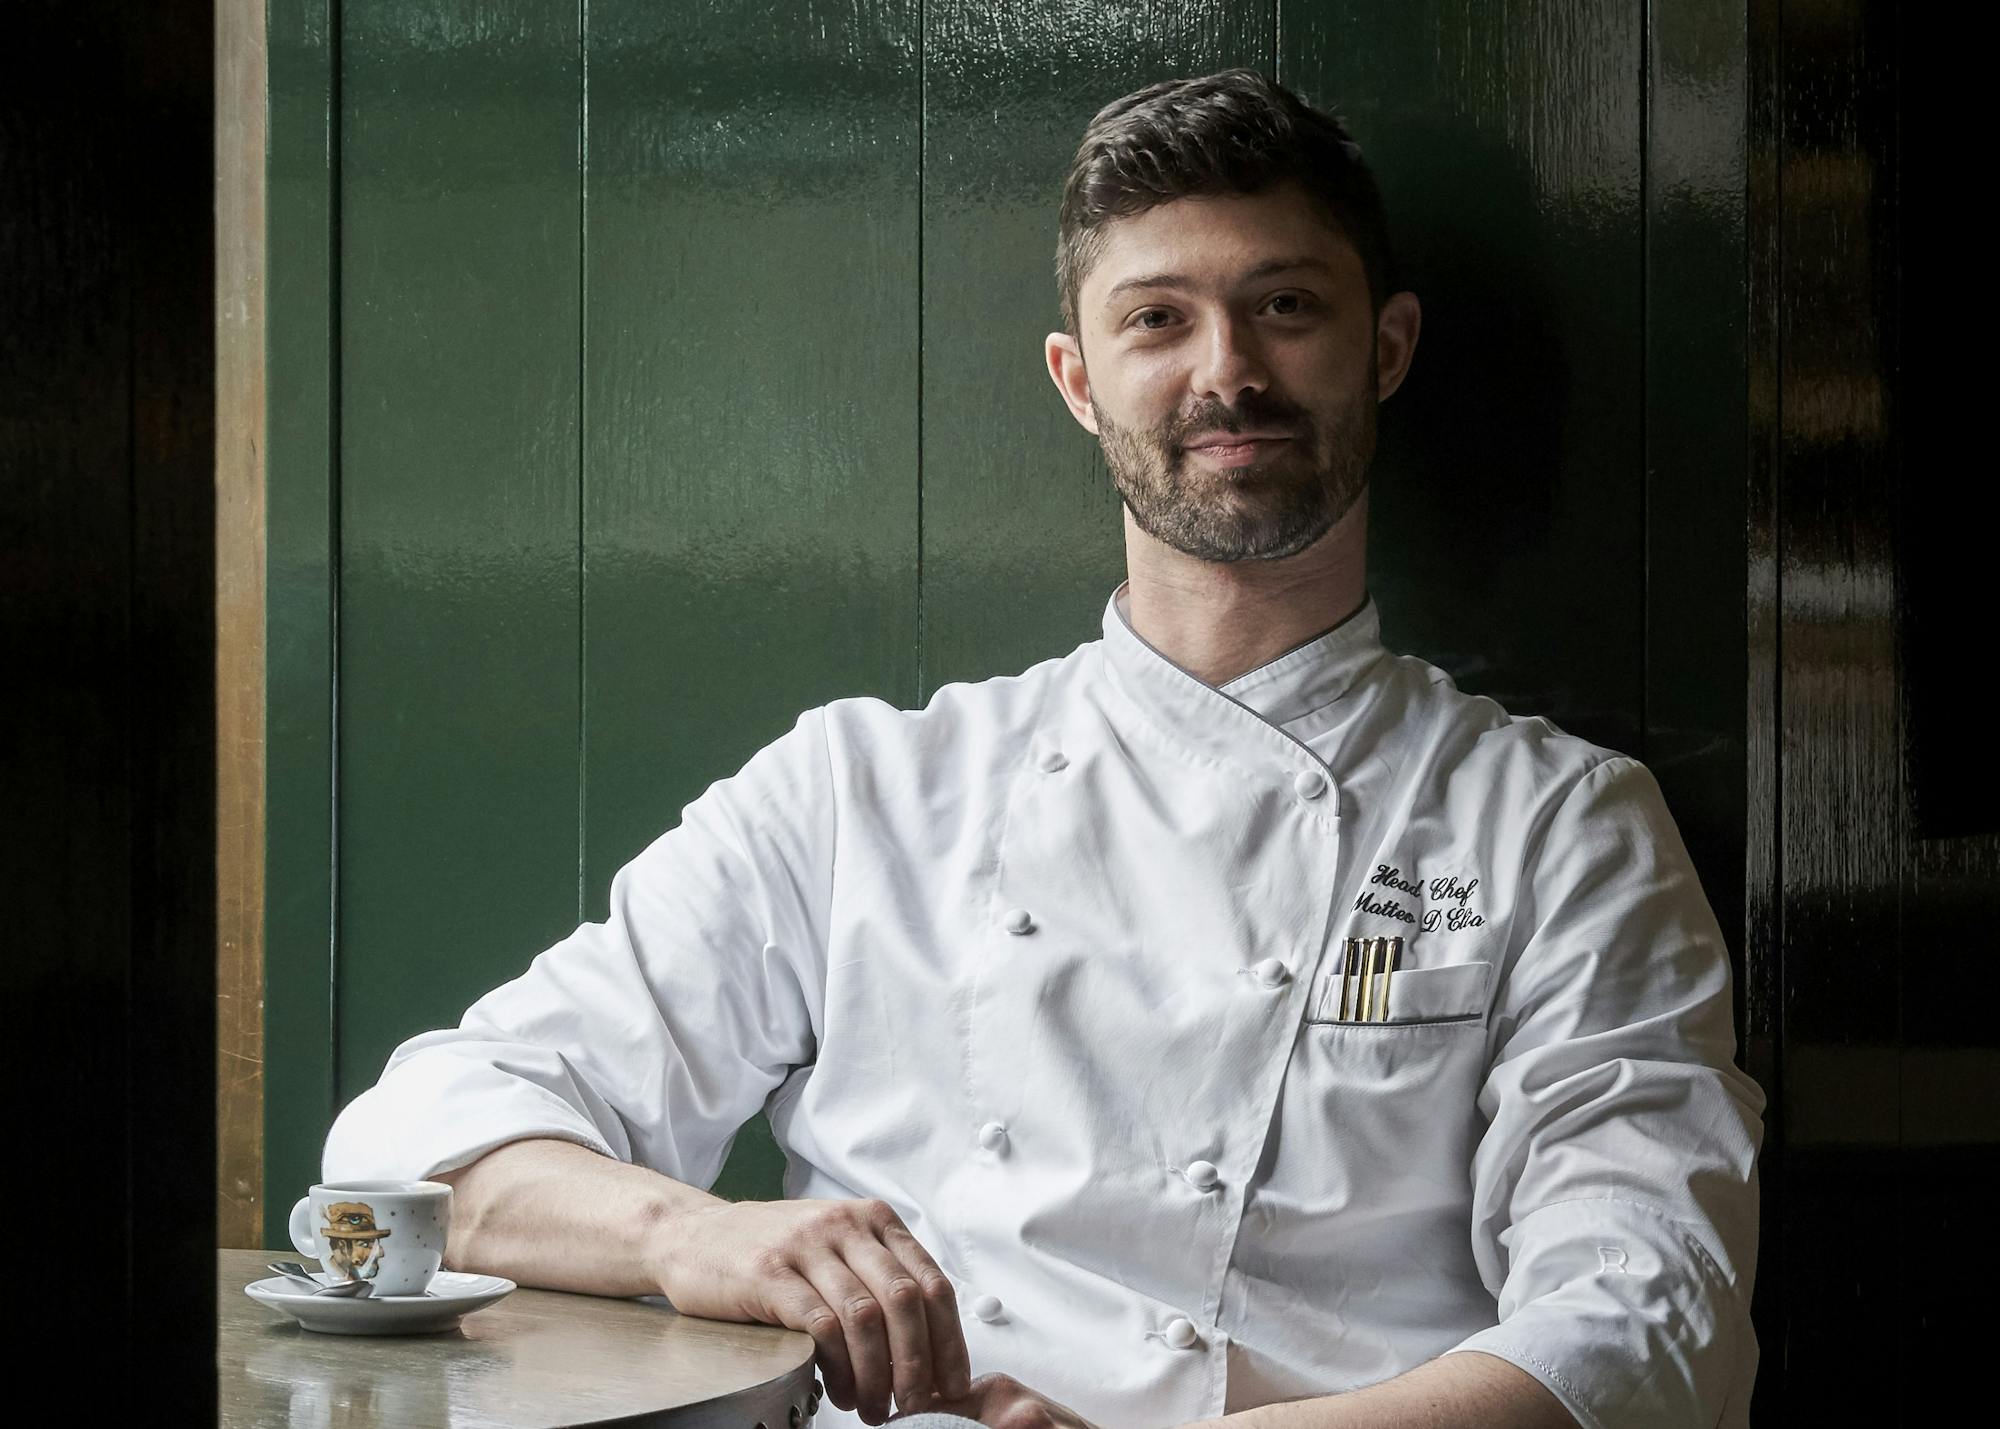 Member News The Hari appoints Matteo D’Elia as Head Chef of Il Pampero 